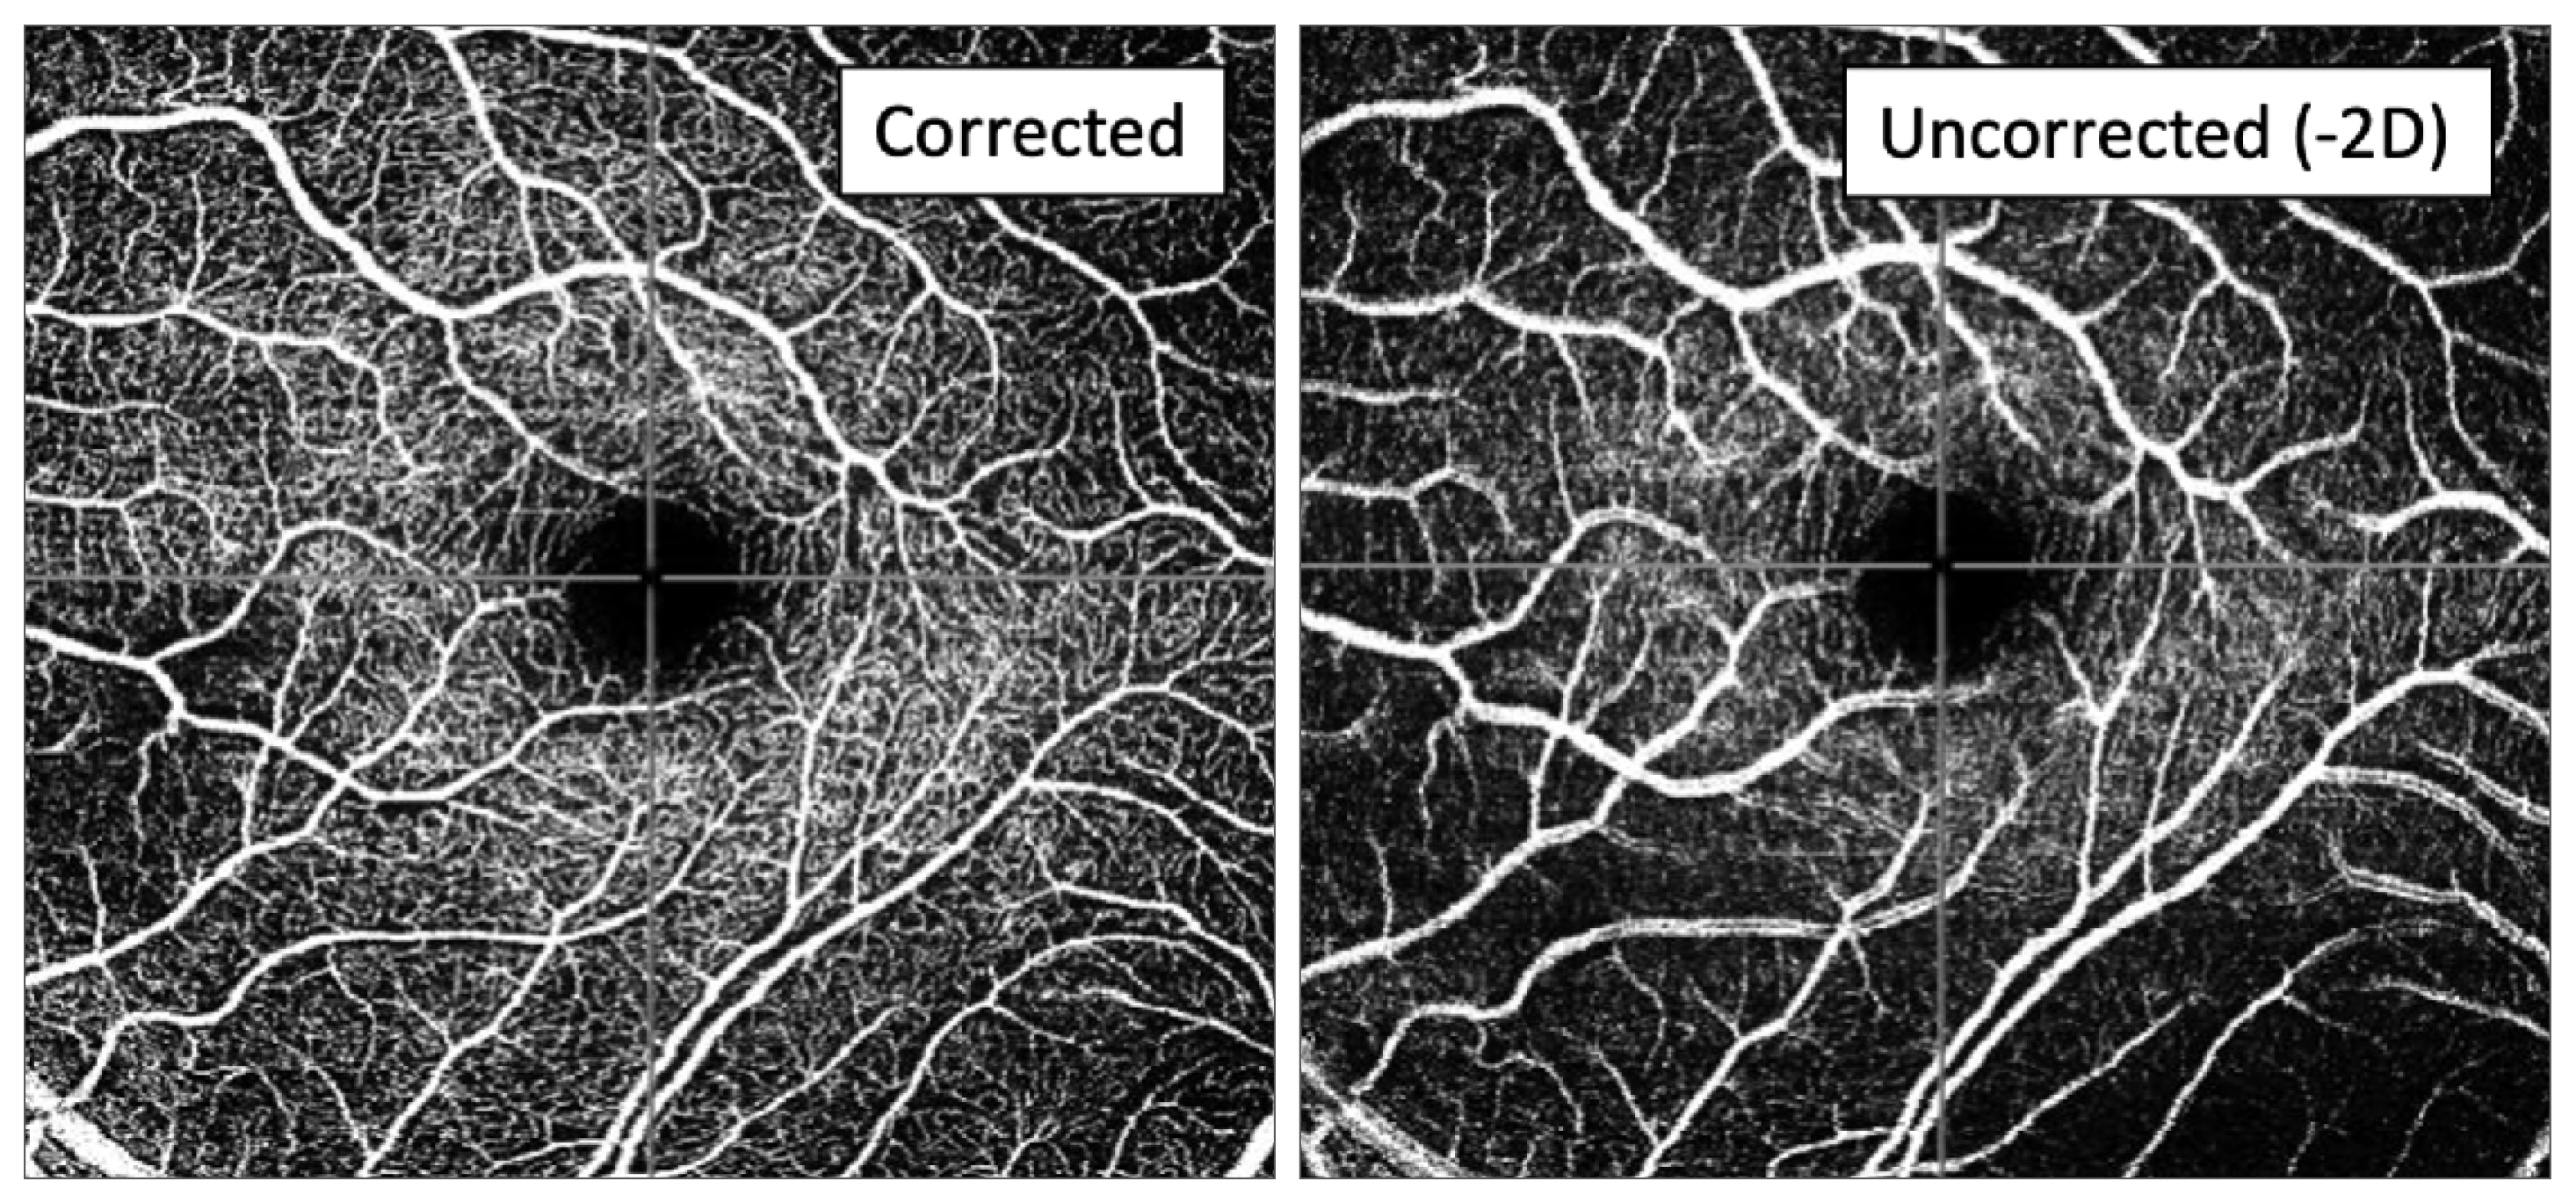 OCT-A of the superficial vascular plexus with and without correction of -2D cyl shows less definition of capillaries and increased diameter of large retinal vessels induced by astigmatism.